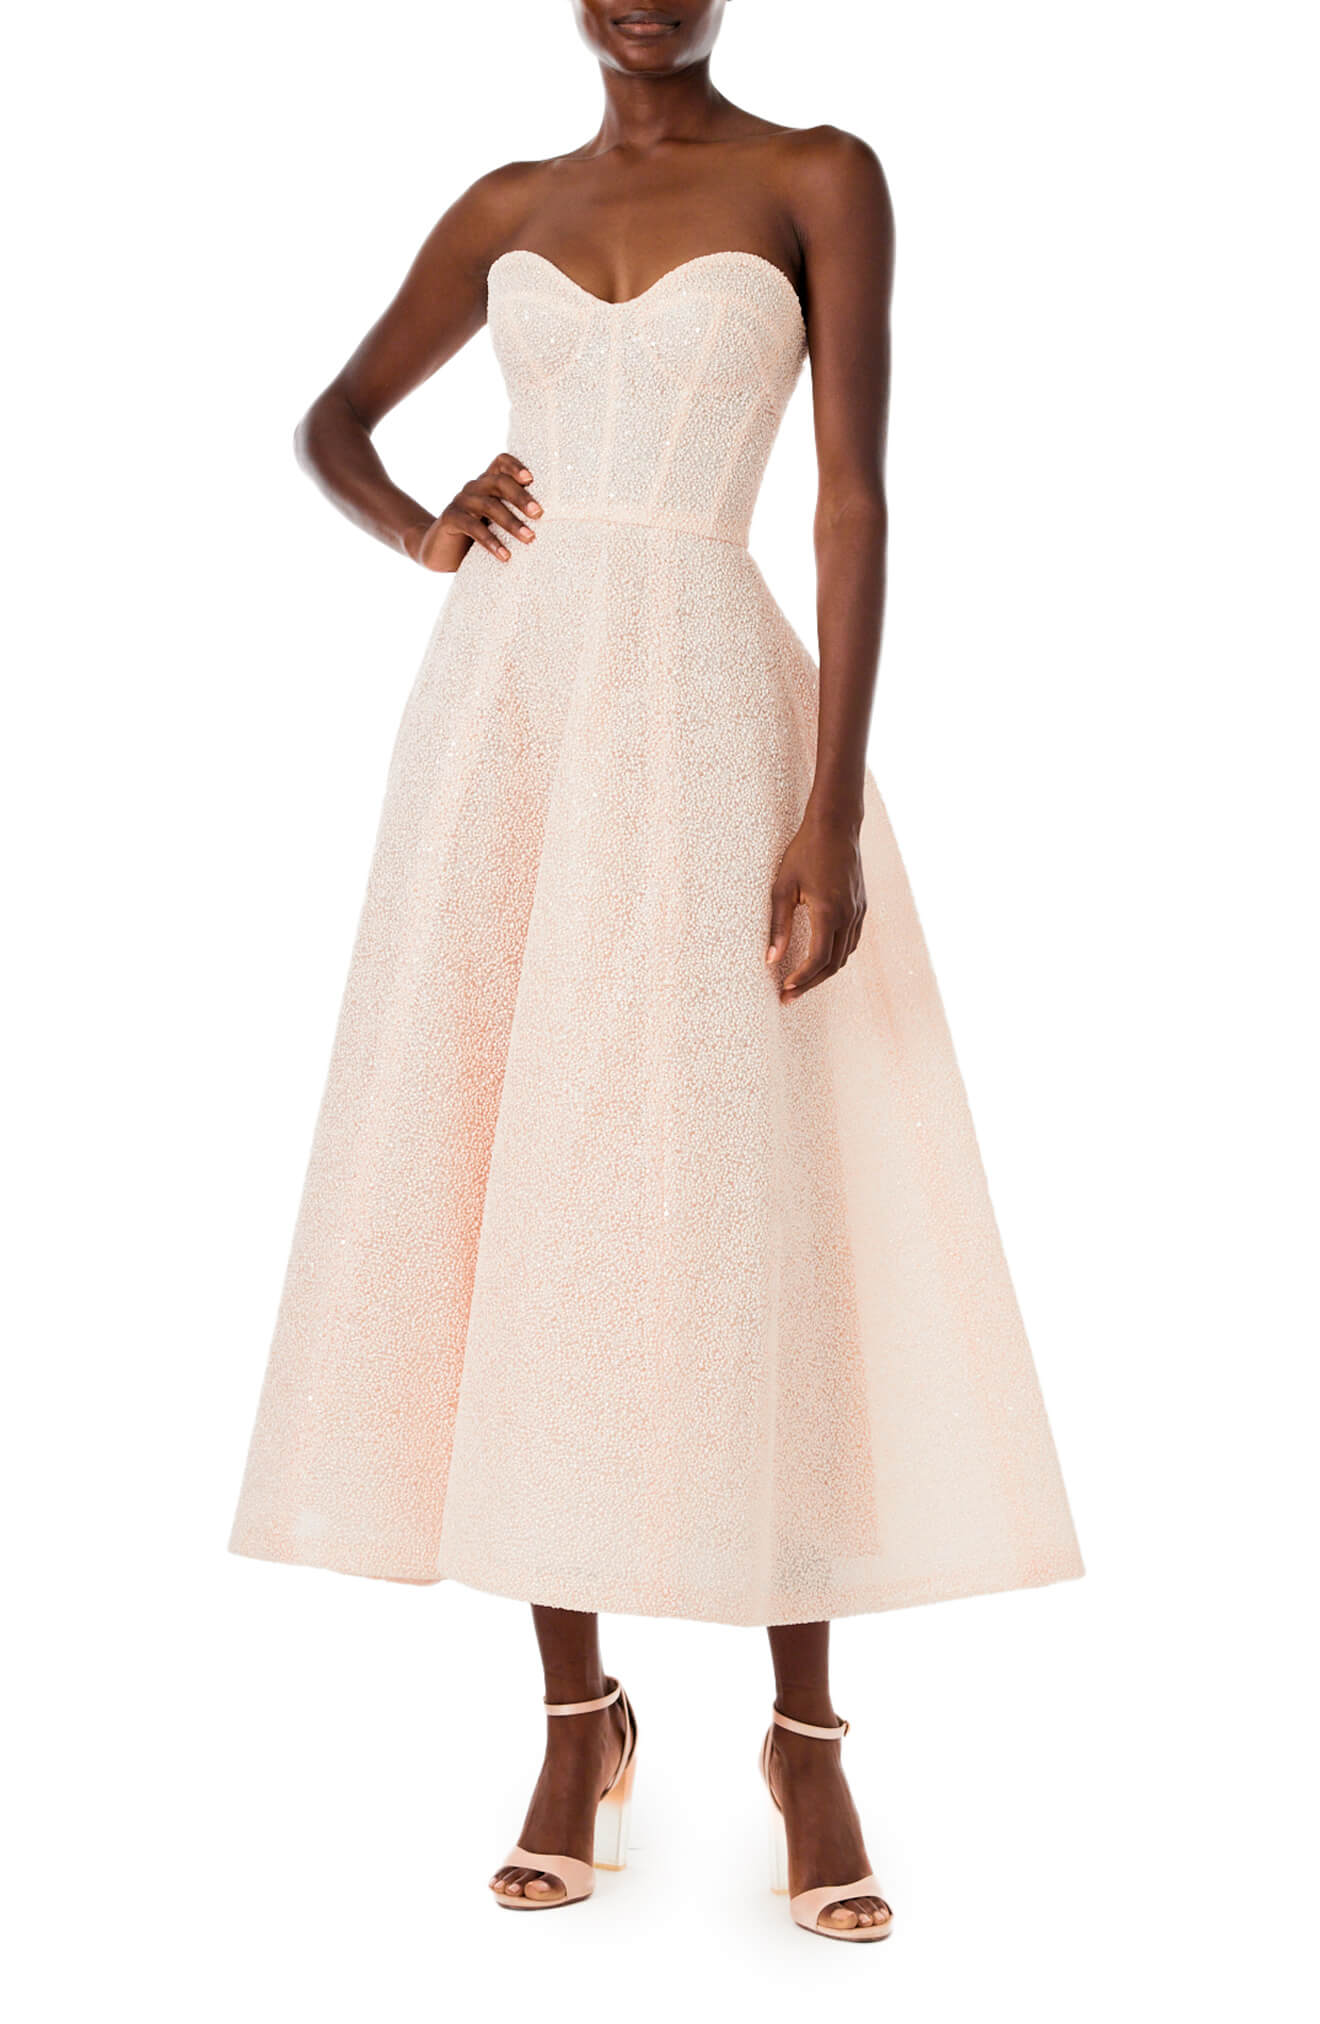 Monique Lhuillier midi length, strapless cocktail dress in powder pink embroidery.